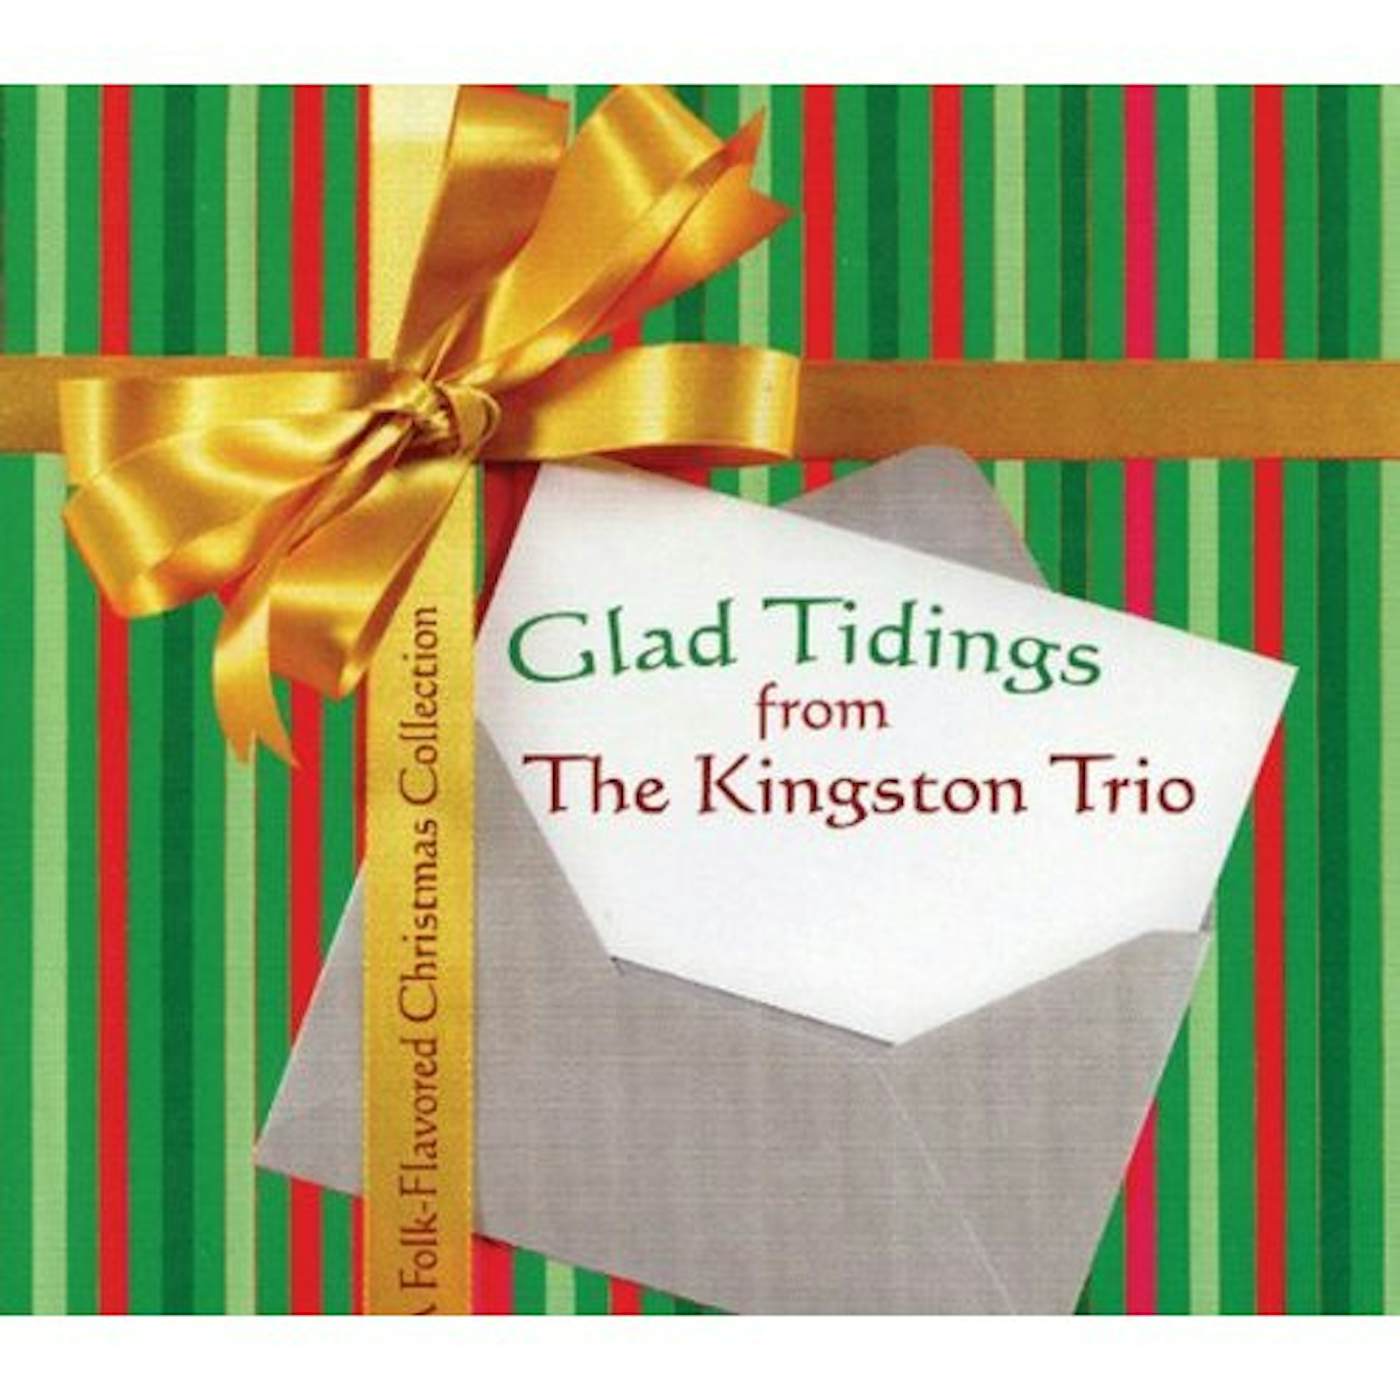 The Kingston Trio GLAD TIDINGS FROM CD